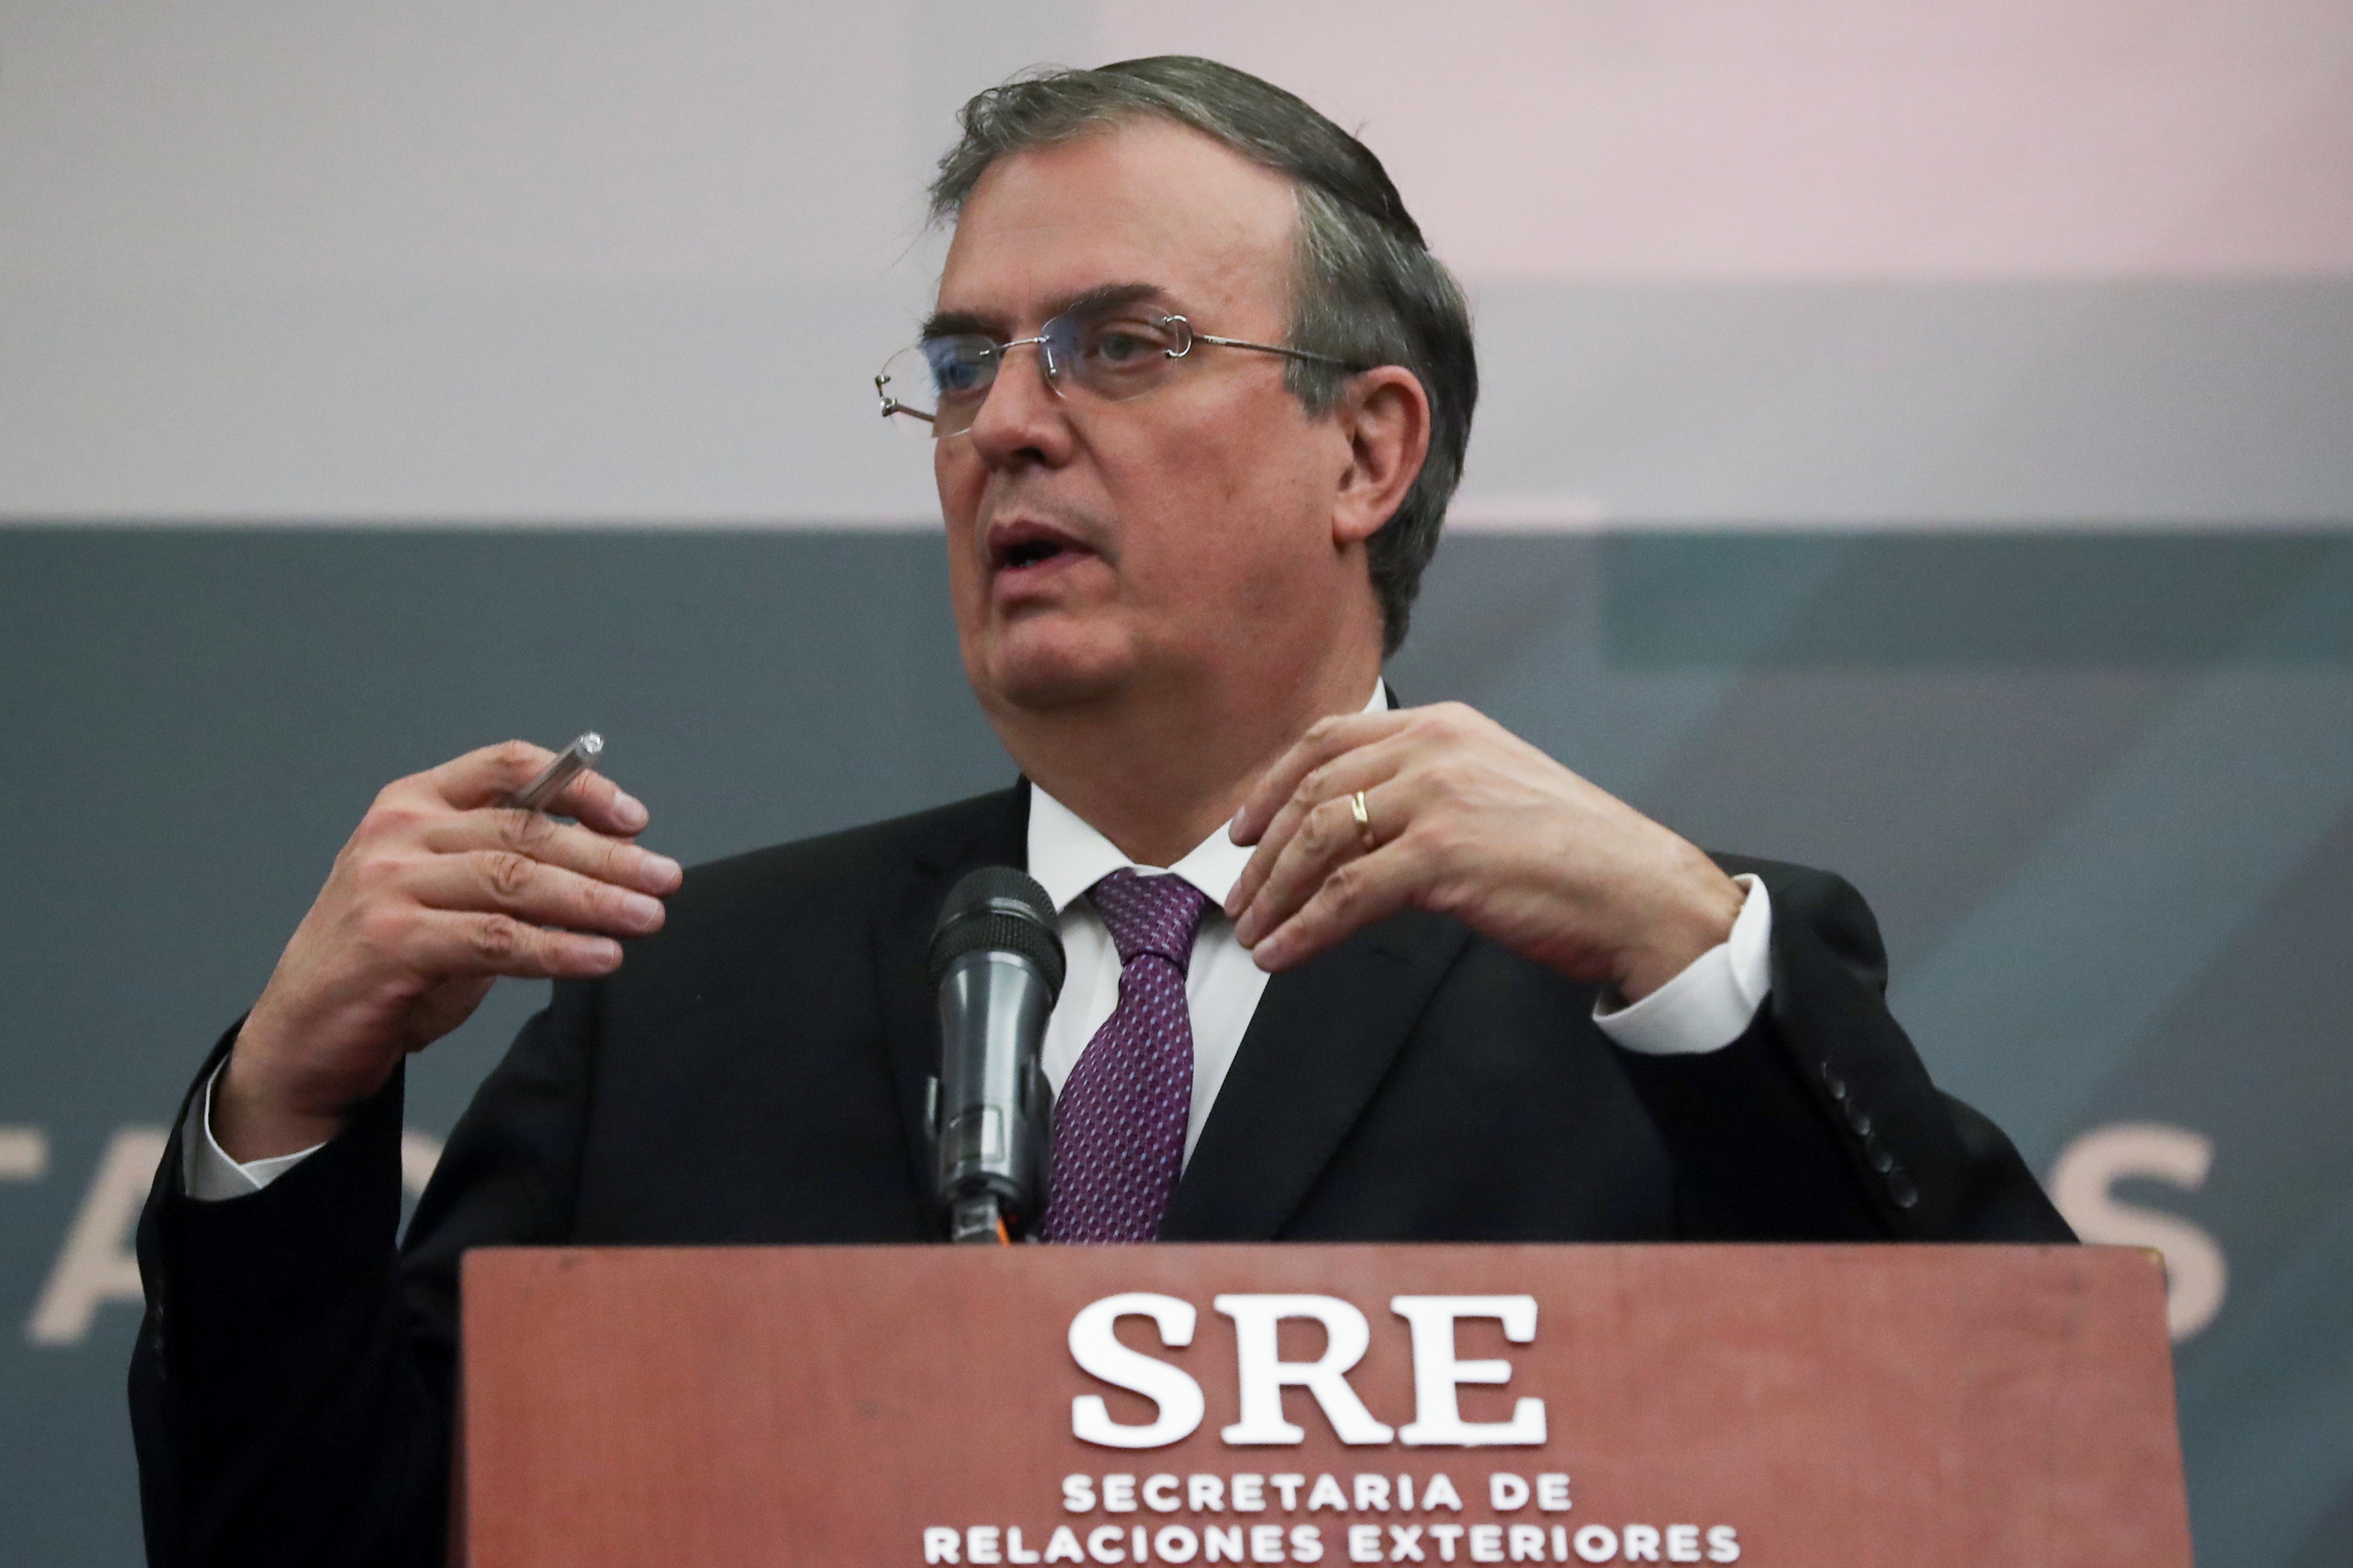 U.S. Secretary of State Blinken and Mexico's Foreign Minister Ebrard address media following U.S.-Mexico High Level Security Dialogue in Mexico City